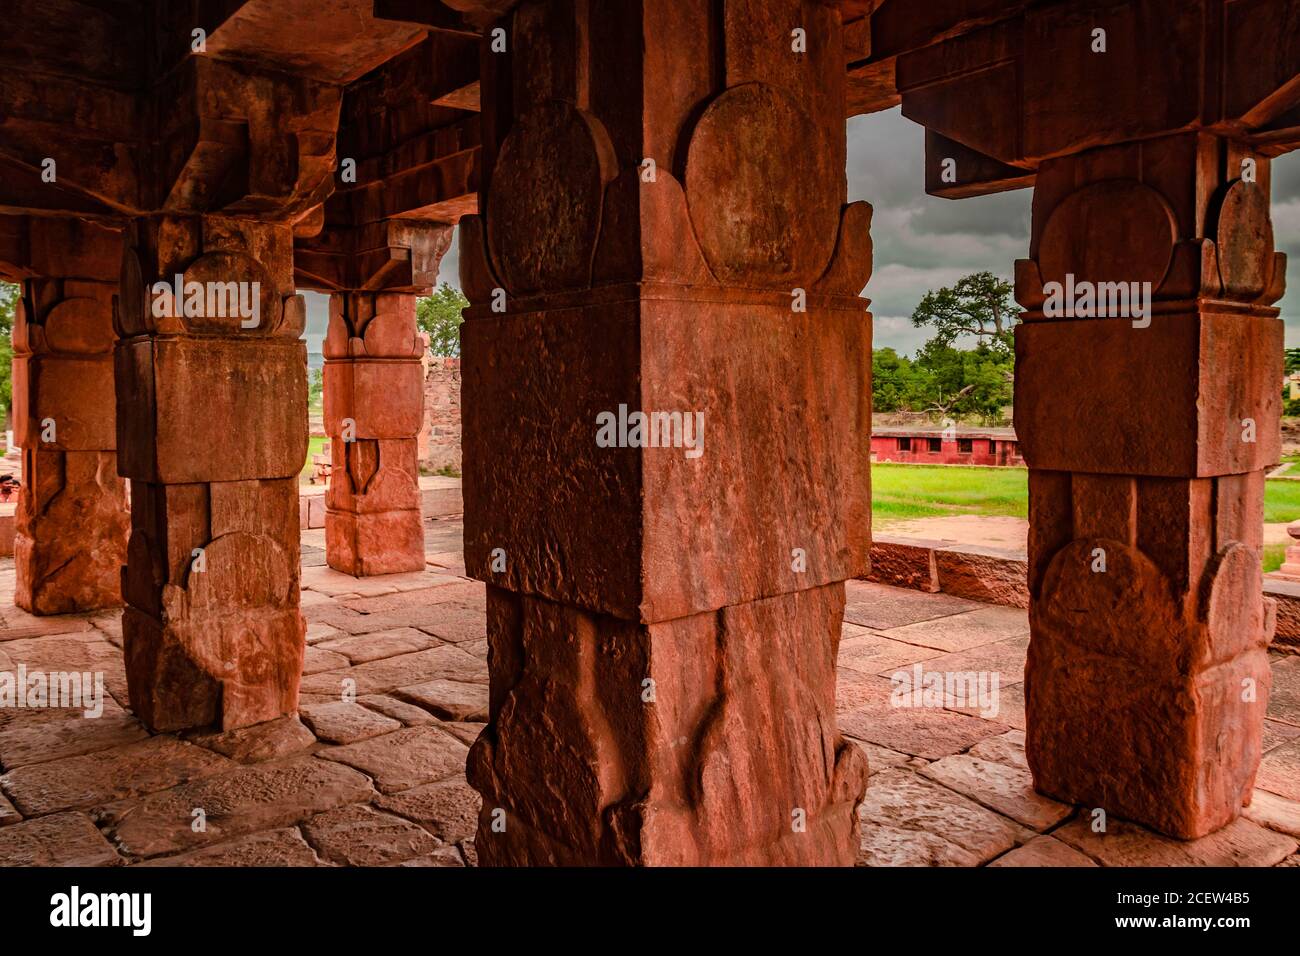 sangameshwara temple pattadakal interior breathtaking stone art with dramatic sky. It's one of the UNESCO World Heritage Sites and complex of 7th and Stock Photo